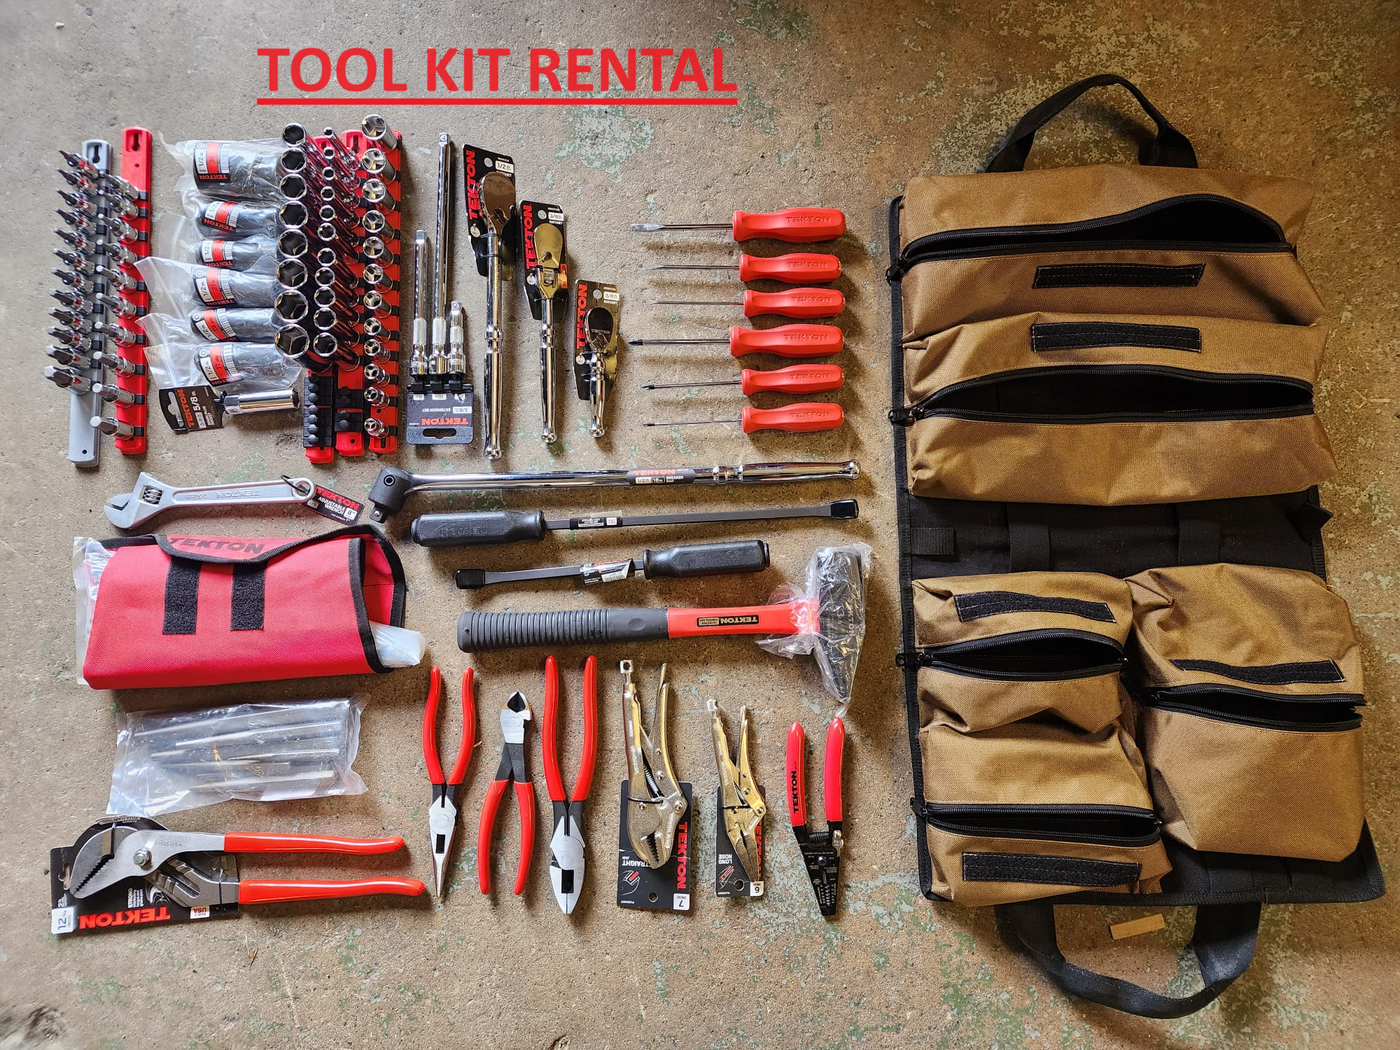 Toyota OffRoad Complete Tool Kit-Rental